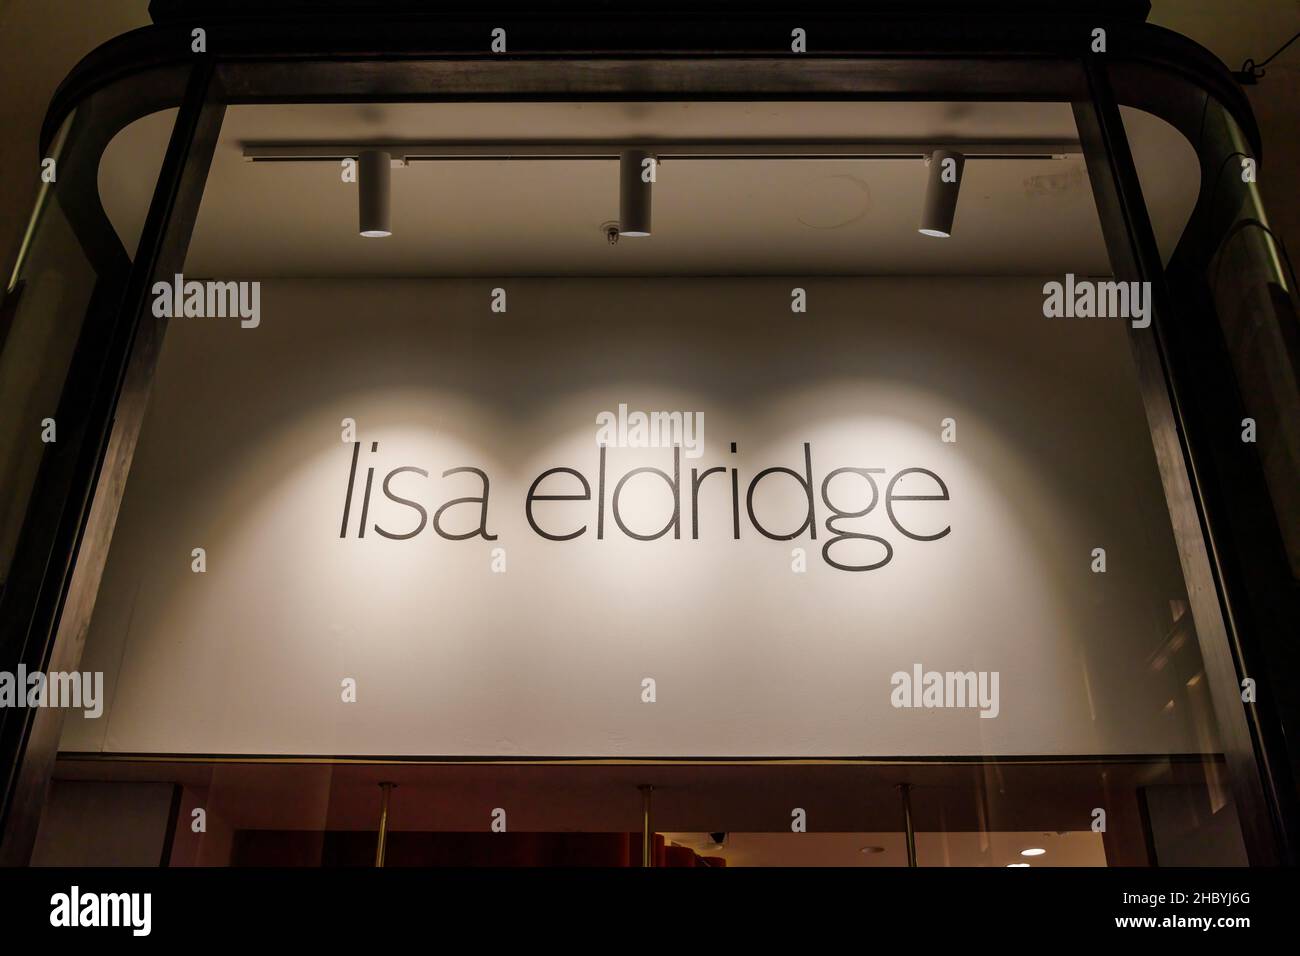 Lisa Eldridge name on the fascia above the entrnace to the pop-up shop in Covent Garden, London WC2: sells cosmetics, lipsticks, makeup Stock Photo